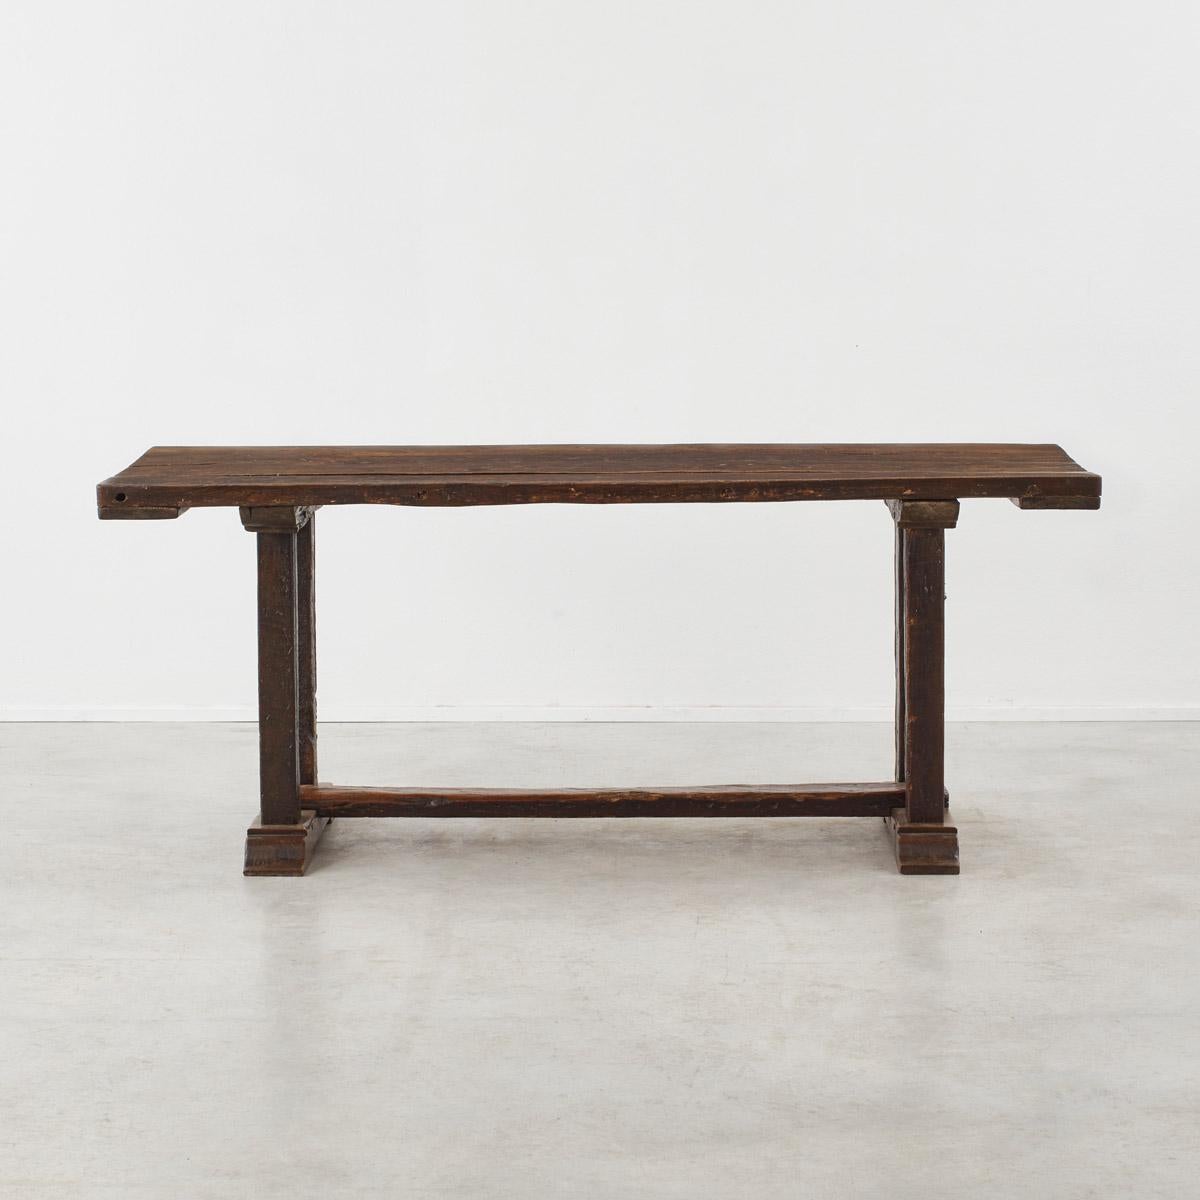 Rustic 18th century antique oak farmhouse or monastery refectory table For Sale